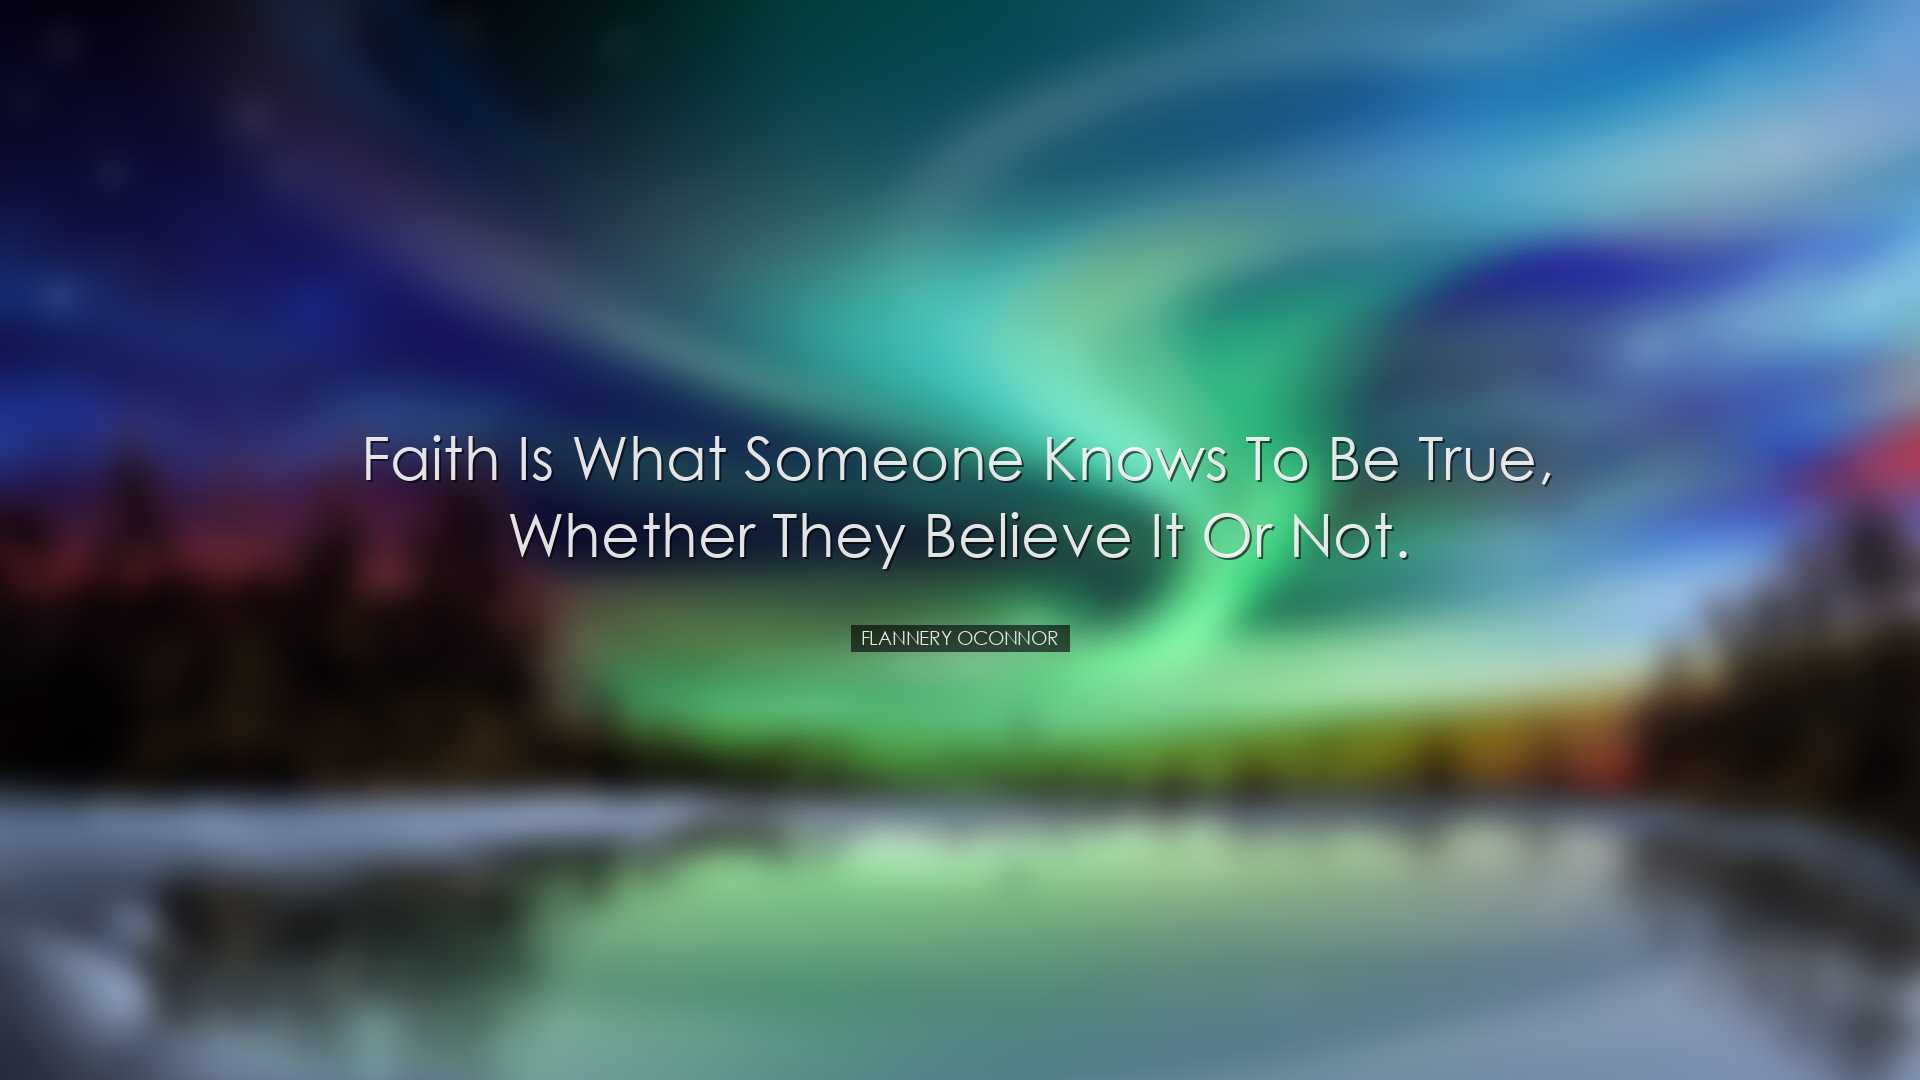 Faith is what someone knows to be true, whether they believe it or